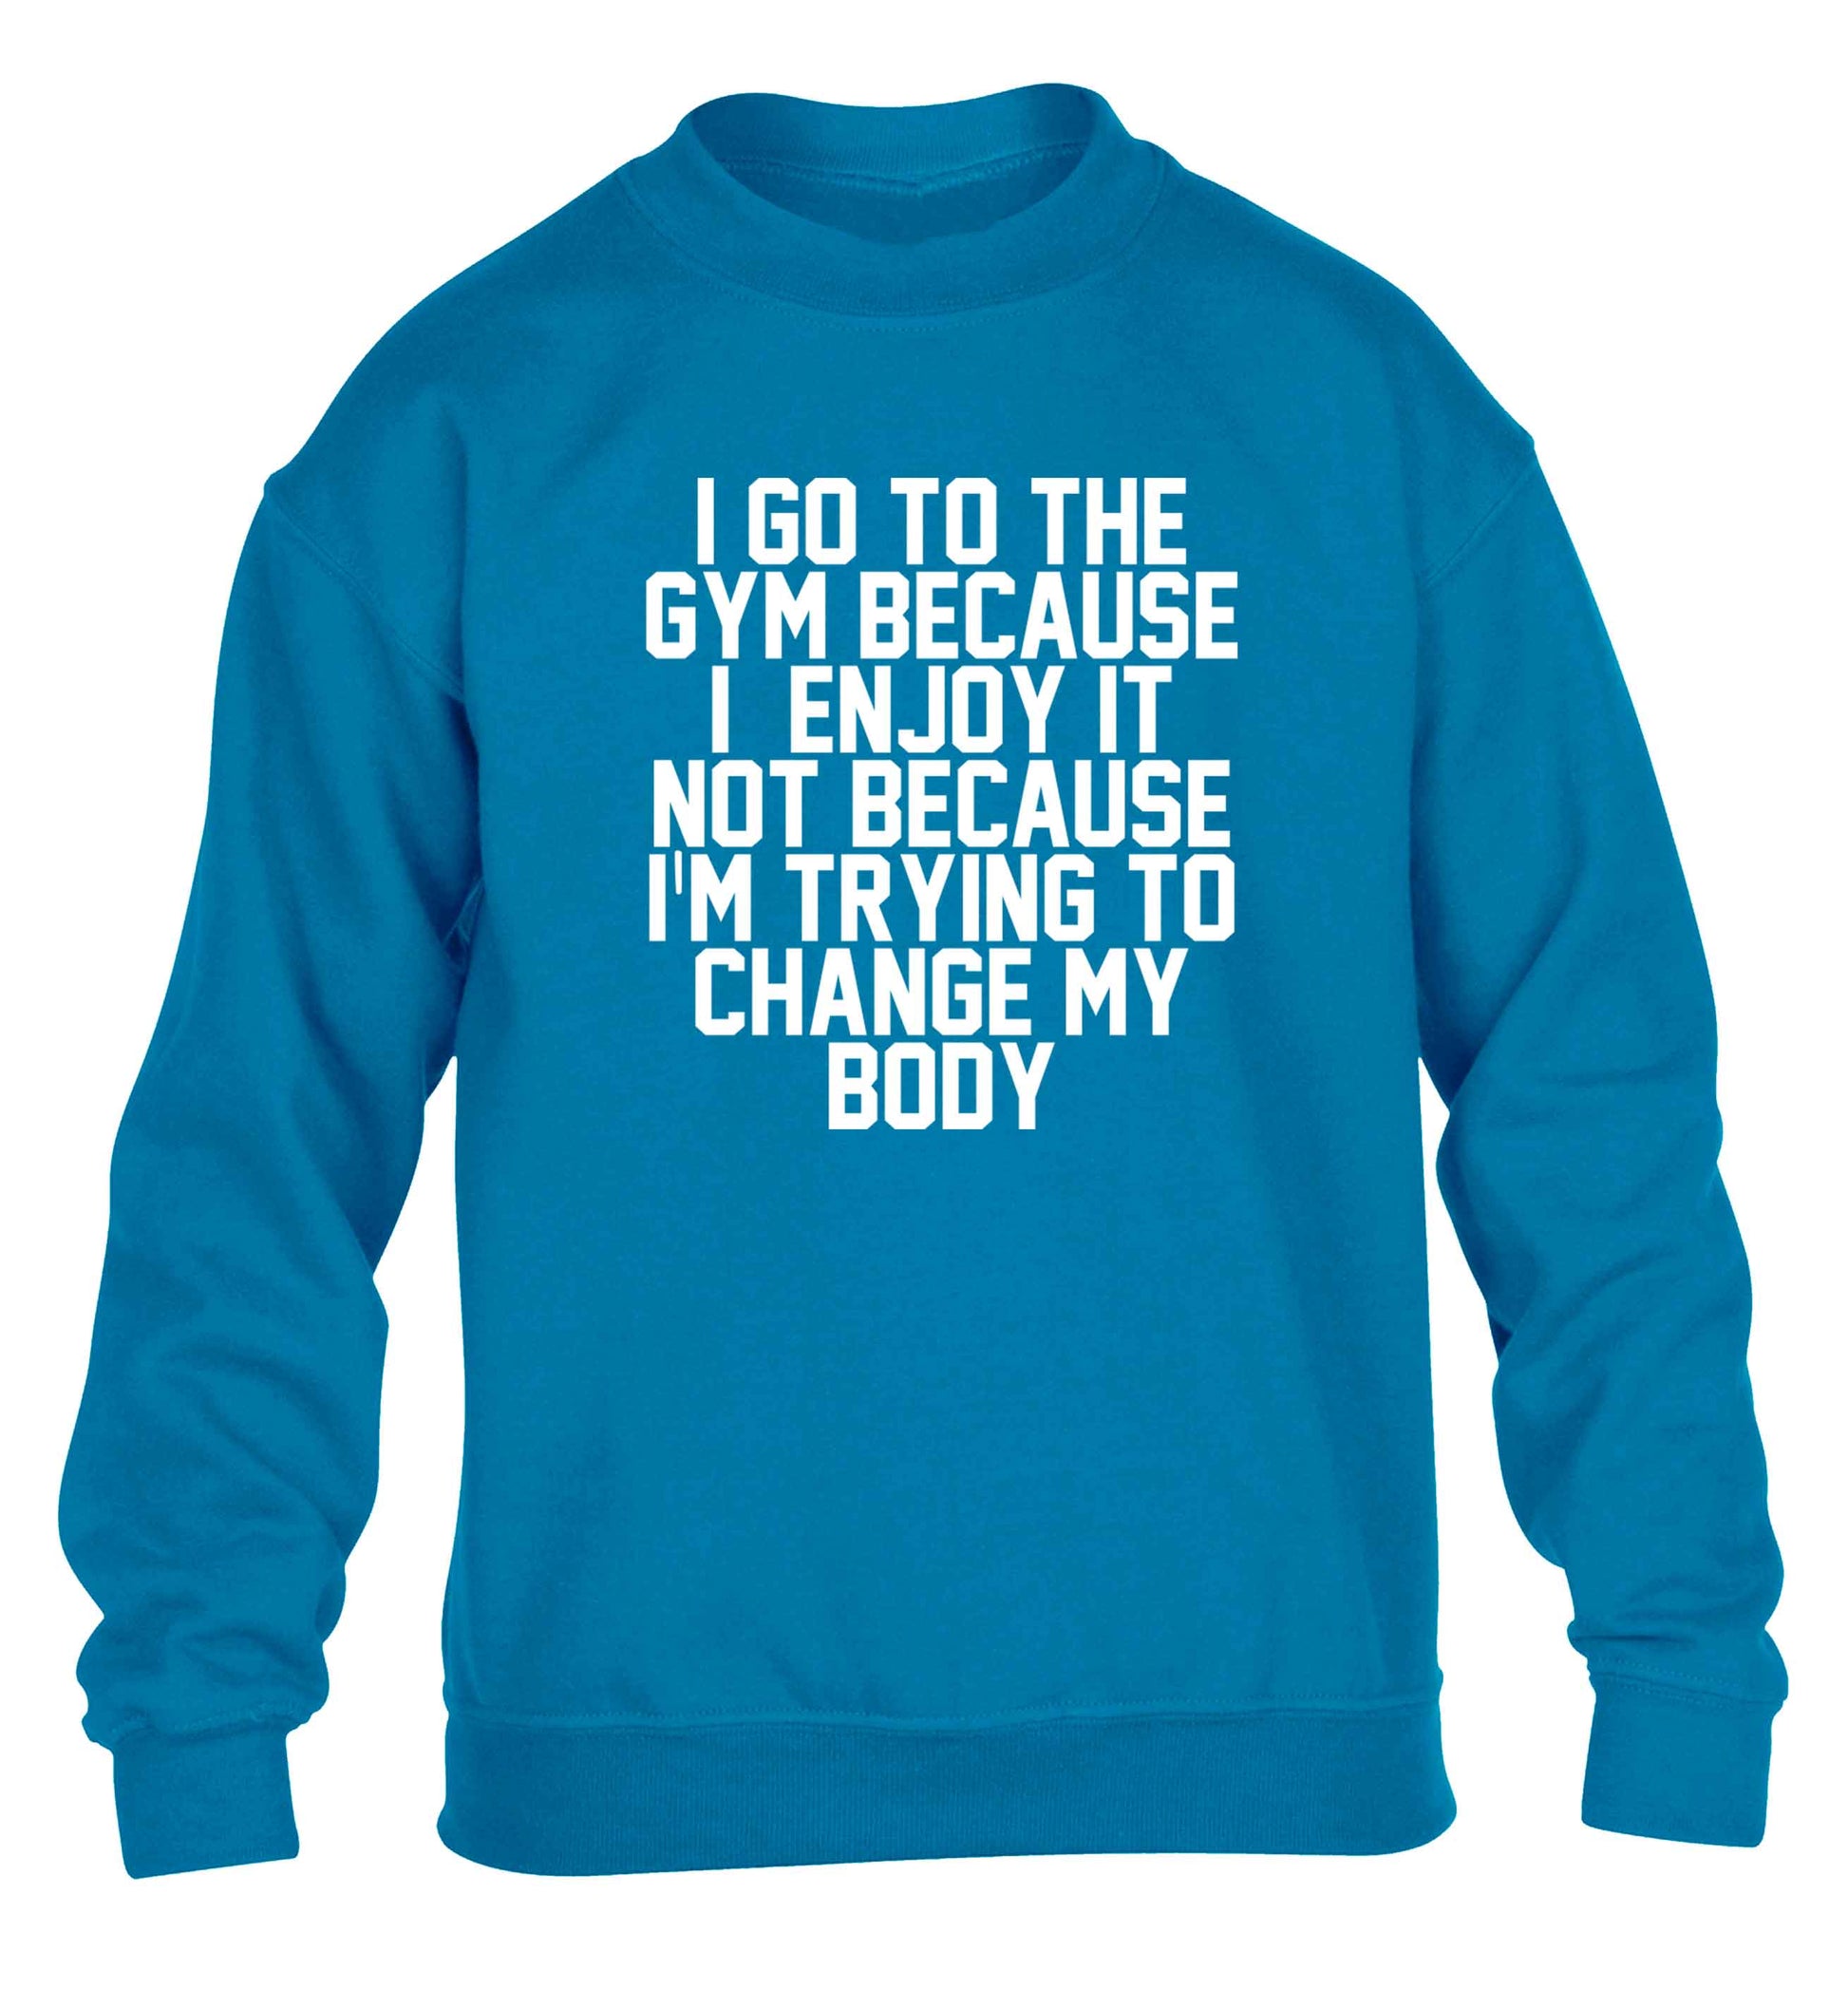 I go to the gym because I enjoy it not because I'm trying to change my body children's blue sweater 12-13 Years